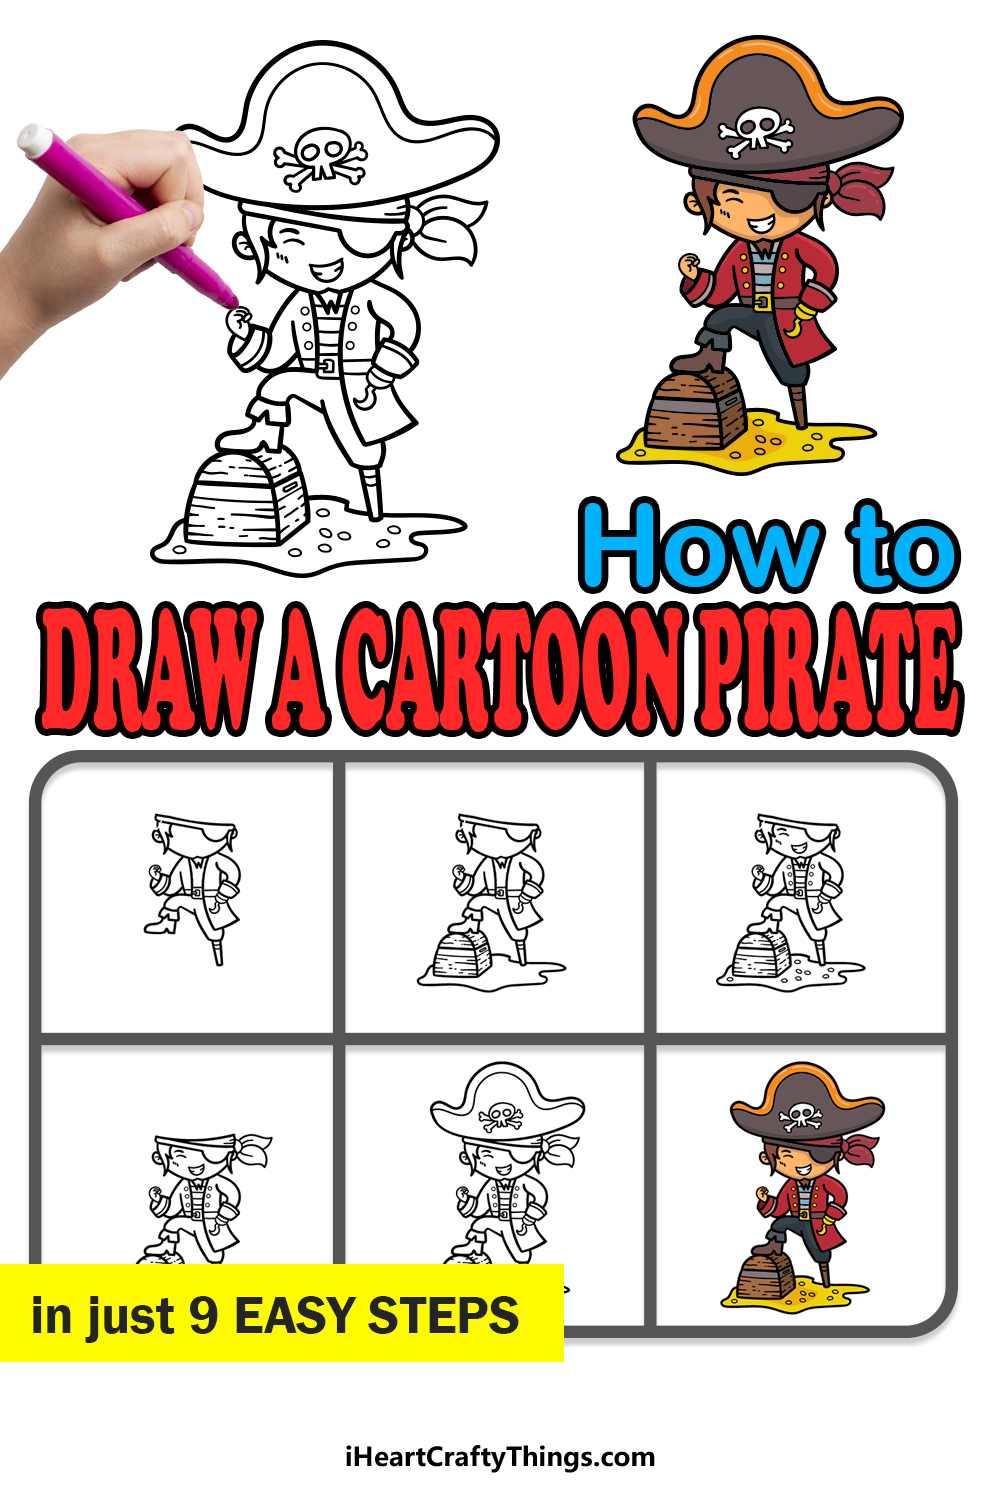 how to draw a cartoon pirate in 9 easy steps